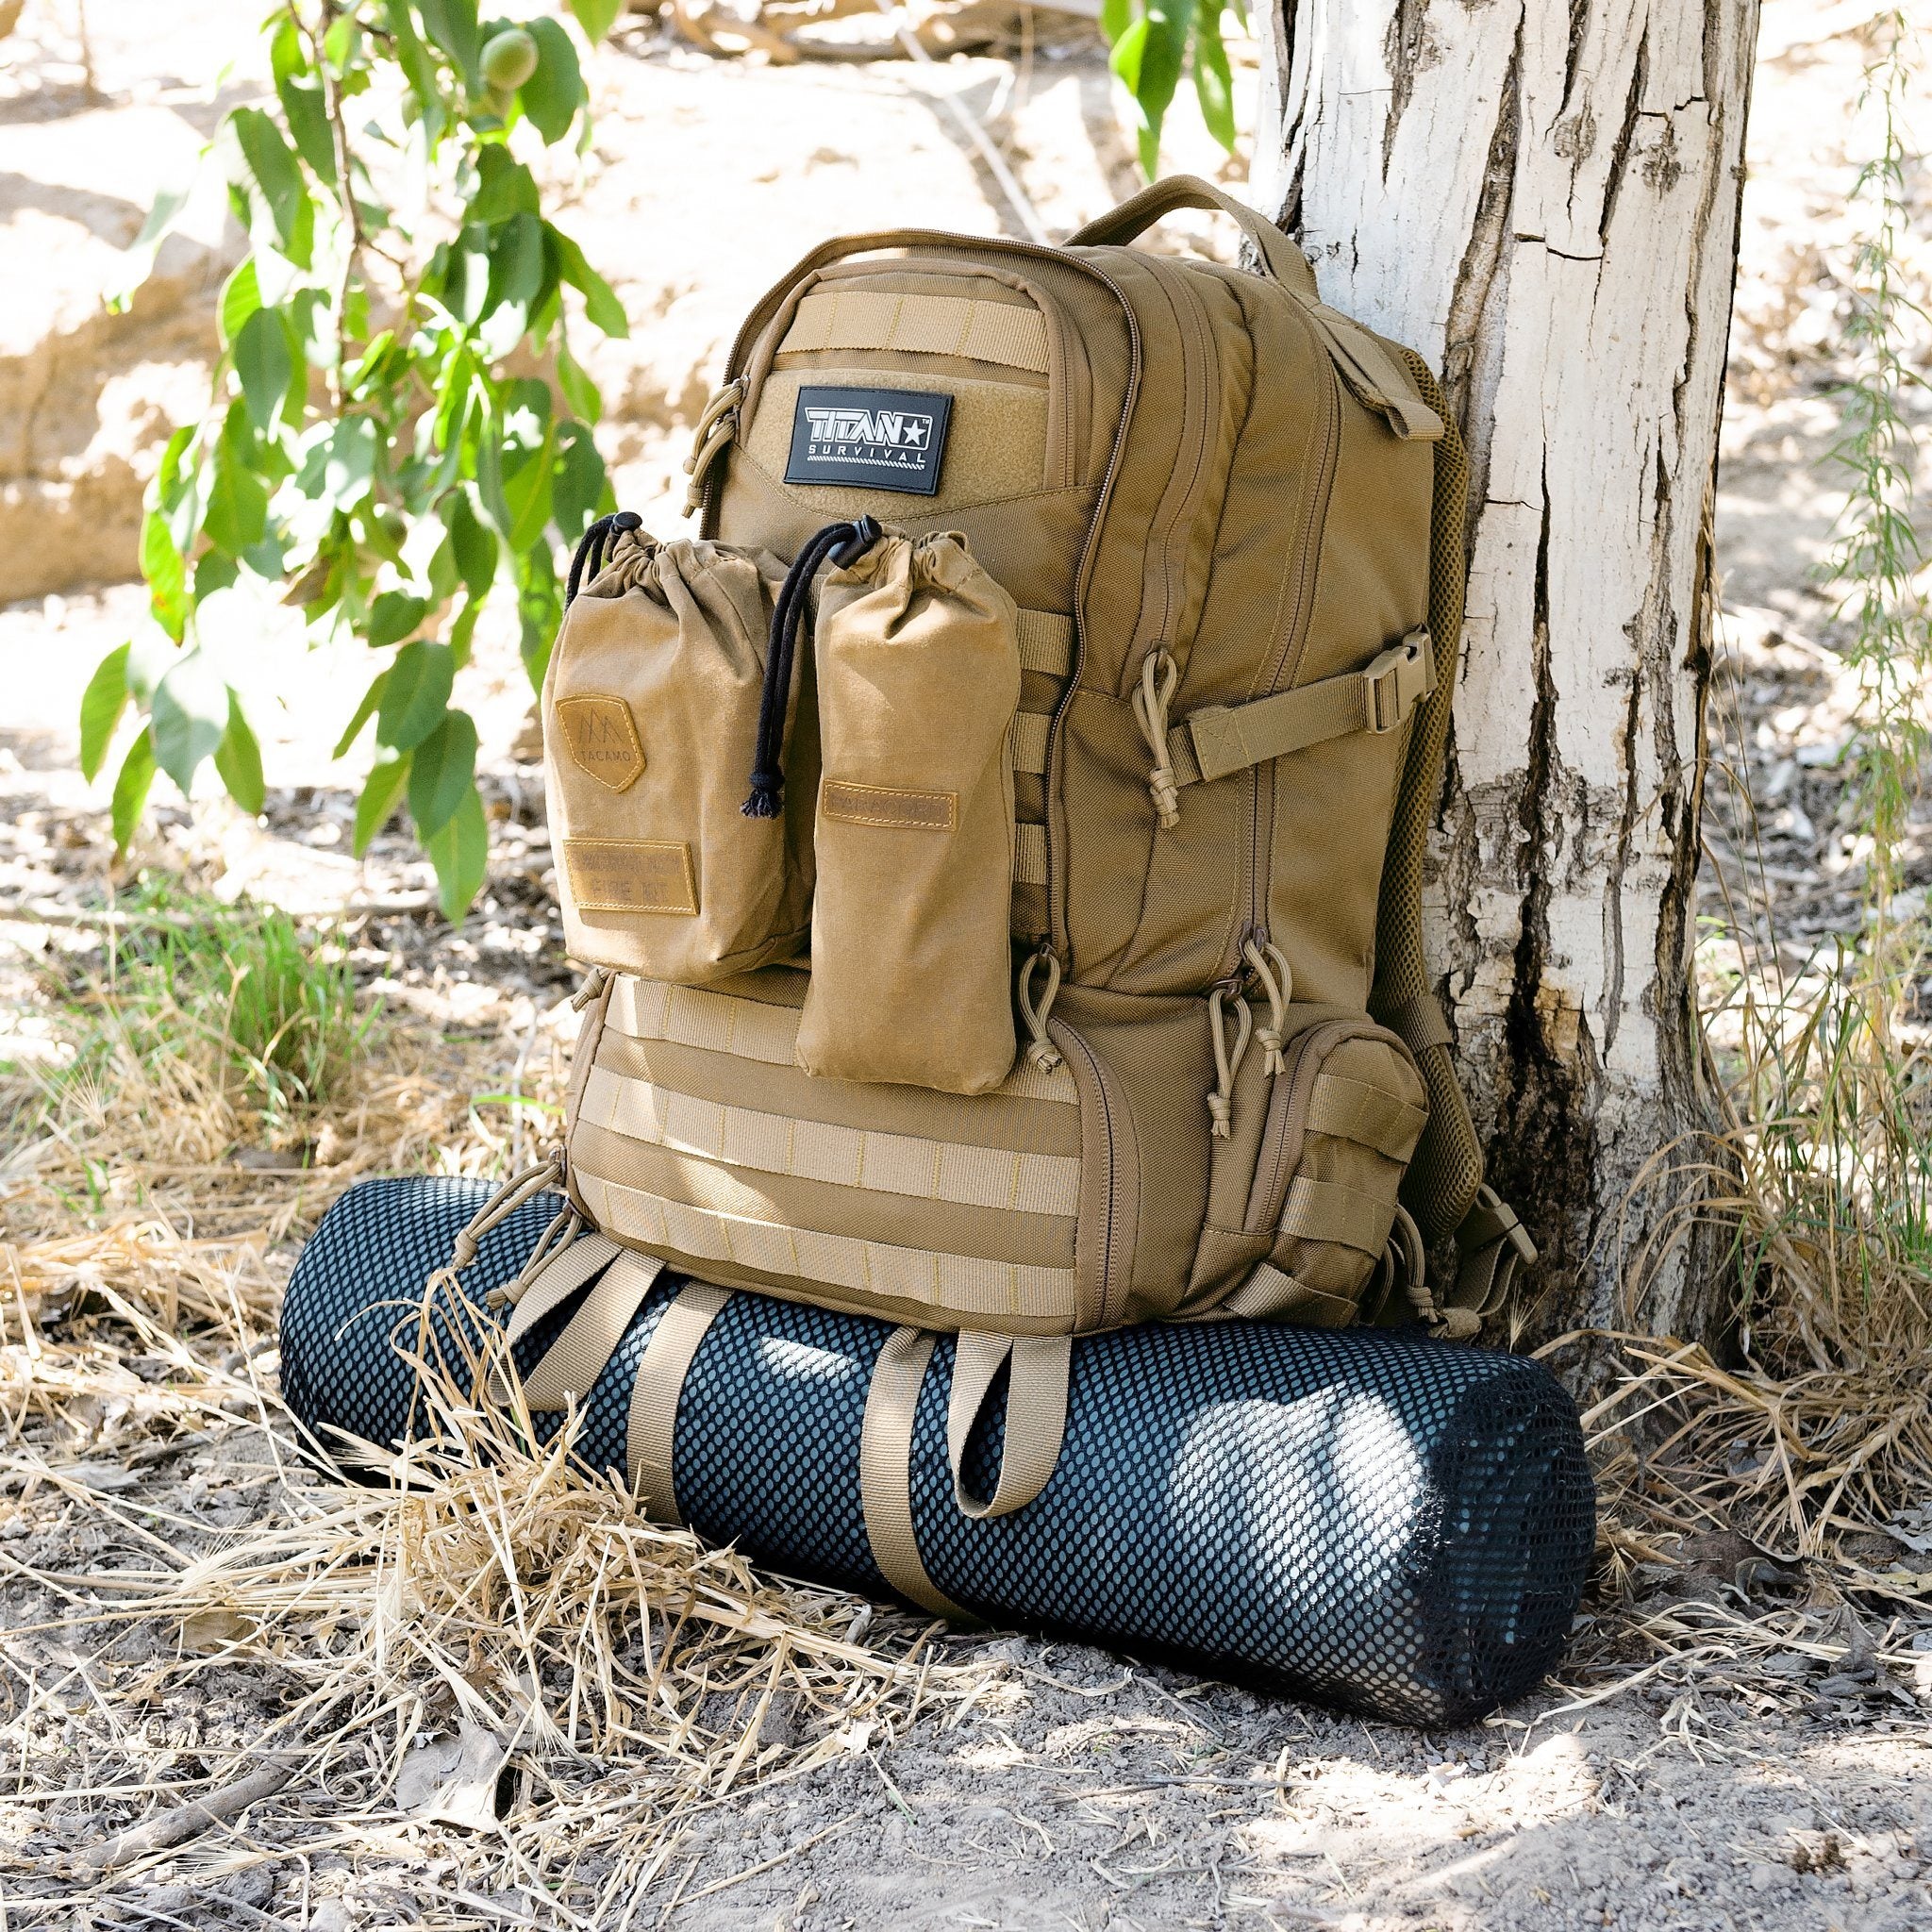 Survival, Tactical, Bushcraft, Military